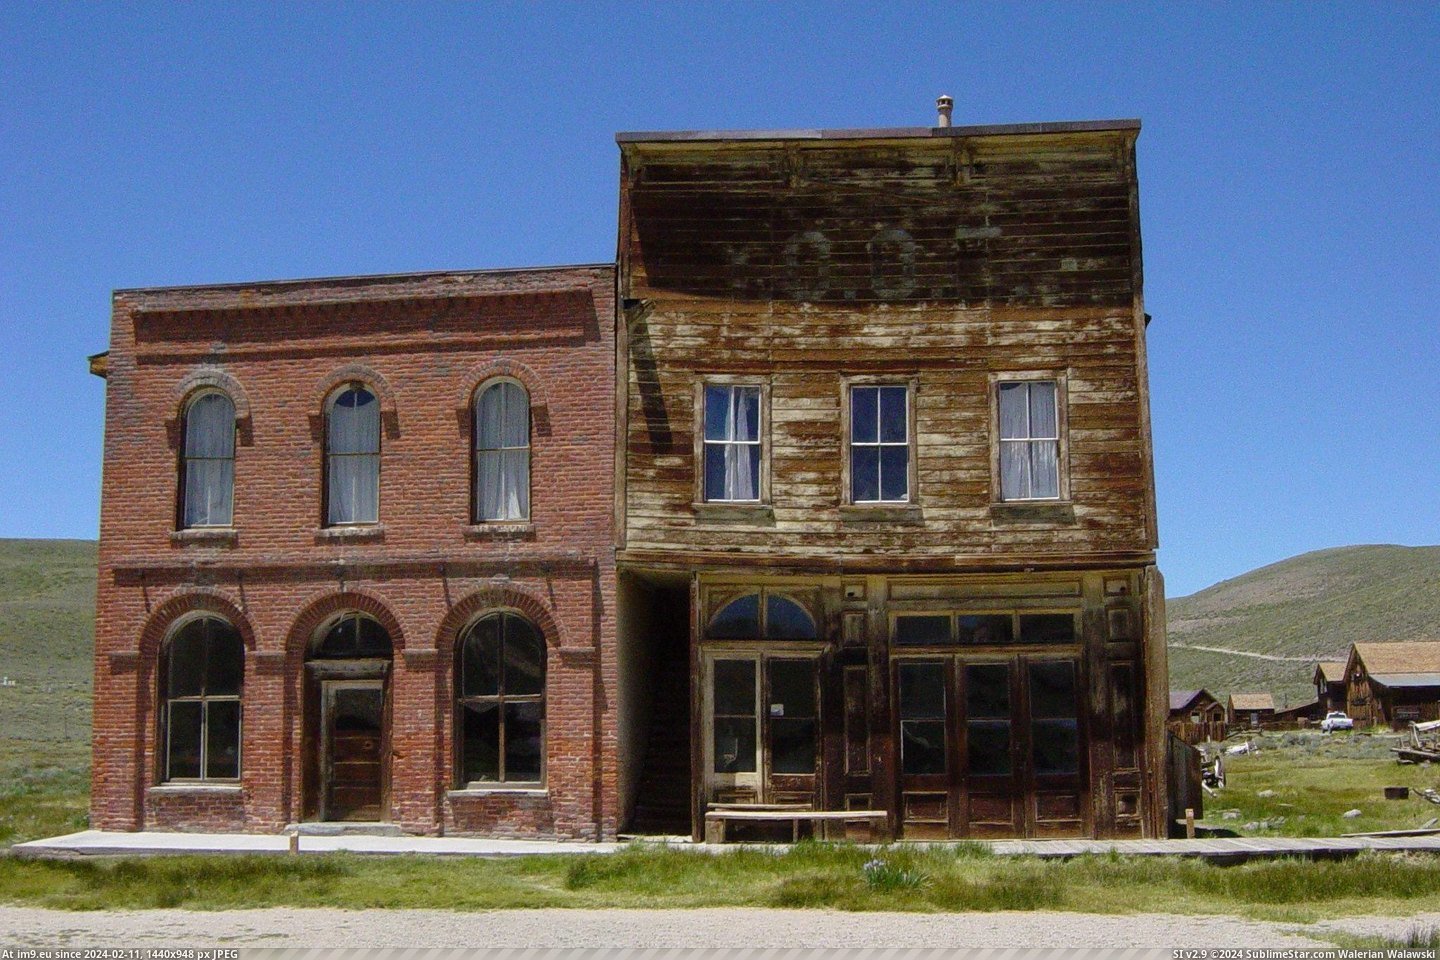 #California #Office #Ioof #Hall #Bodie Ioof Hall And Post Office In Bodie, California Pic. (Bild von album Bodie - a ghost town in Eastern California))